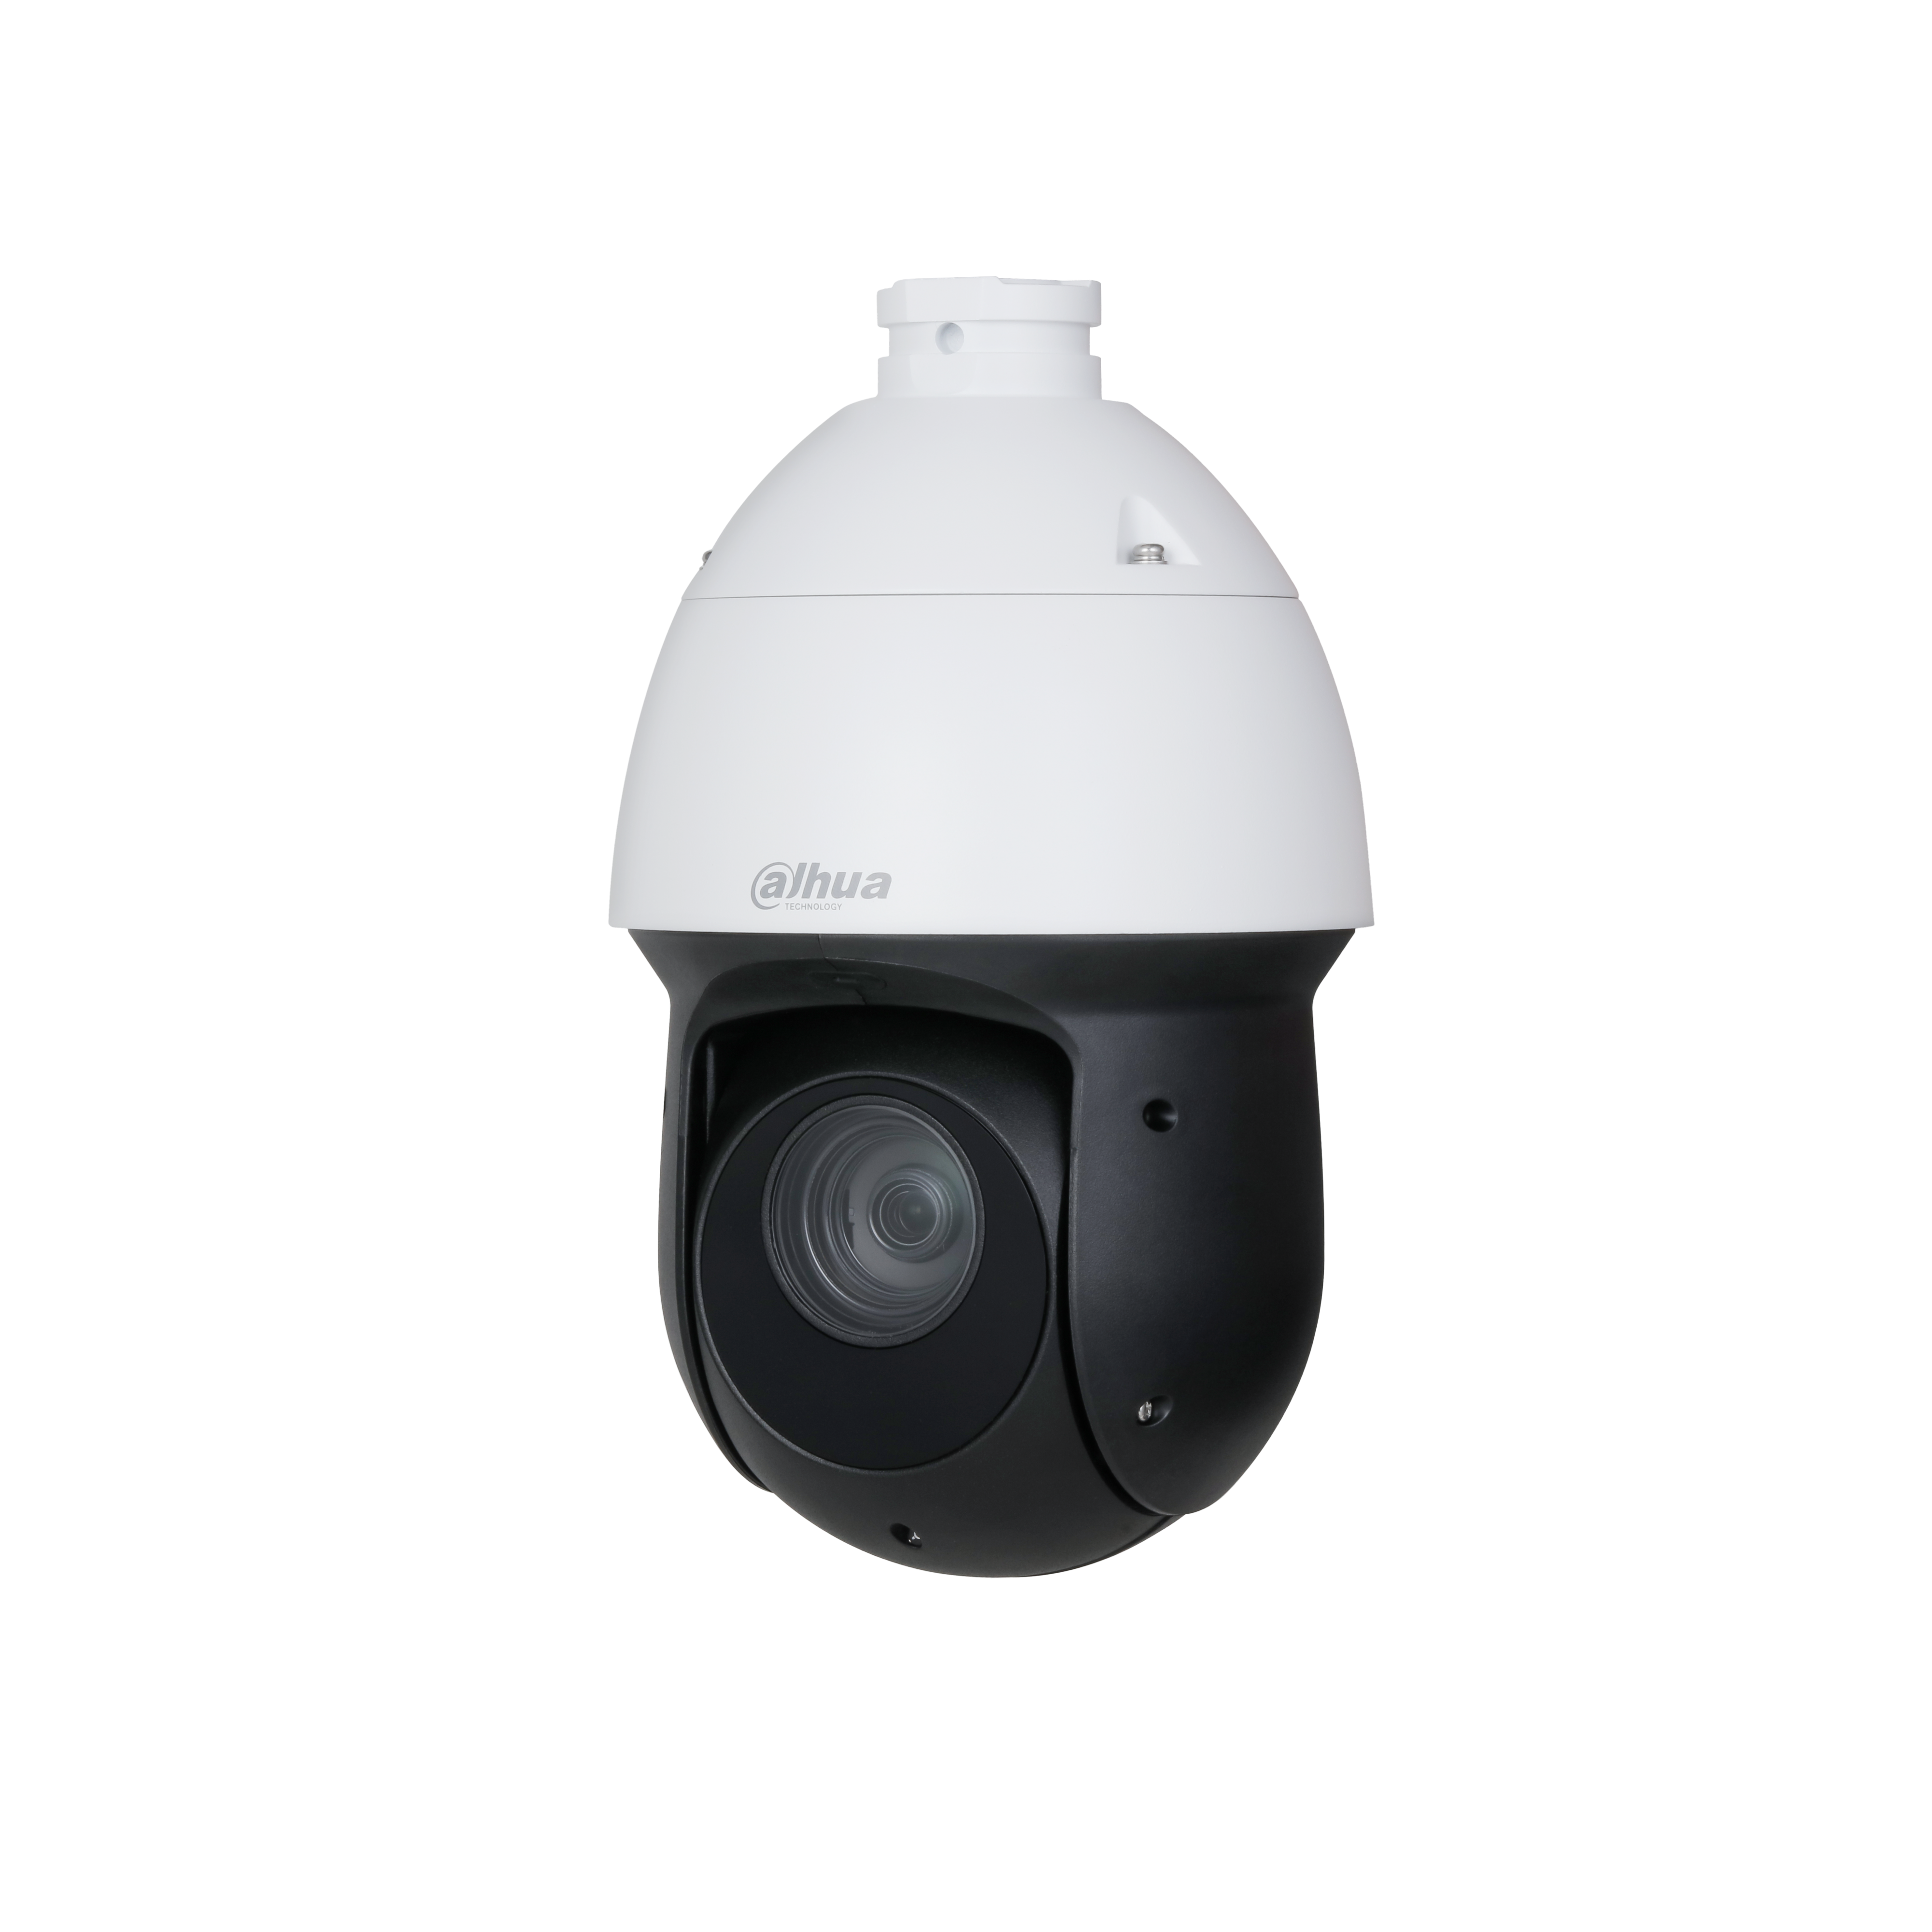 WIZSENSE SERIES IP CAMERA WHITE AI 4MP H.264/4+/5/5+ SPEED DOME PTZ 120 WDR PLASTIC/METAL 5-125MMMOTORISED LENS 25X ZOOM STARLIGHT IR 100M POE IP66 WITHOUT MIC AUDIO IN AUDIO OUT 2 x ALARM IN 1 x ALARM OUT SUPPORT UP TO 512GB SD 12VDC